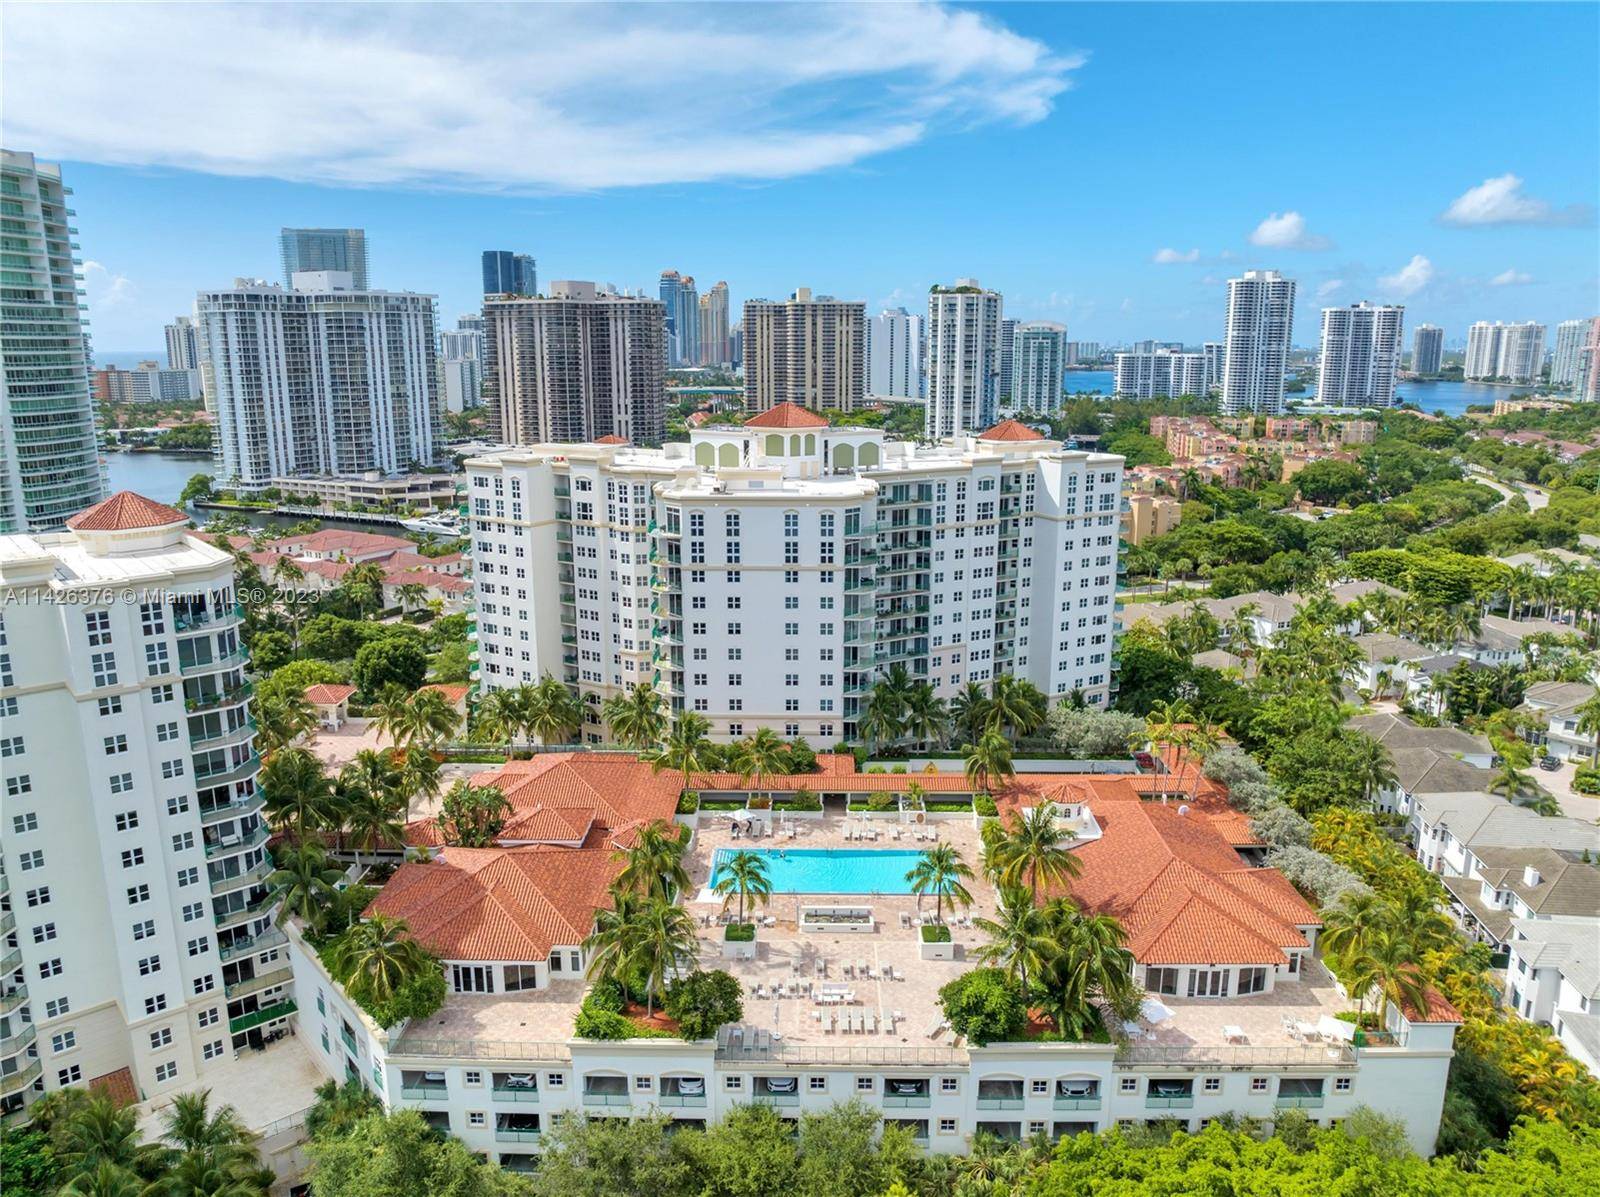 Two bedroom two bathroom apartment for sale in the luxurious resort style living of the Turnberry Condo in Aventura.